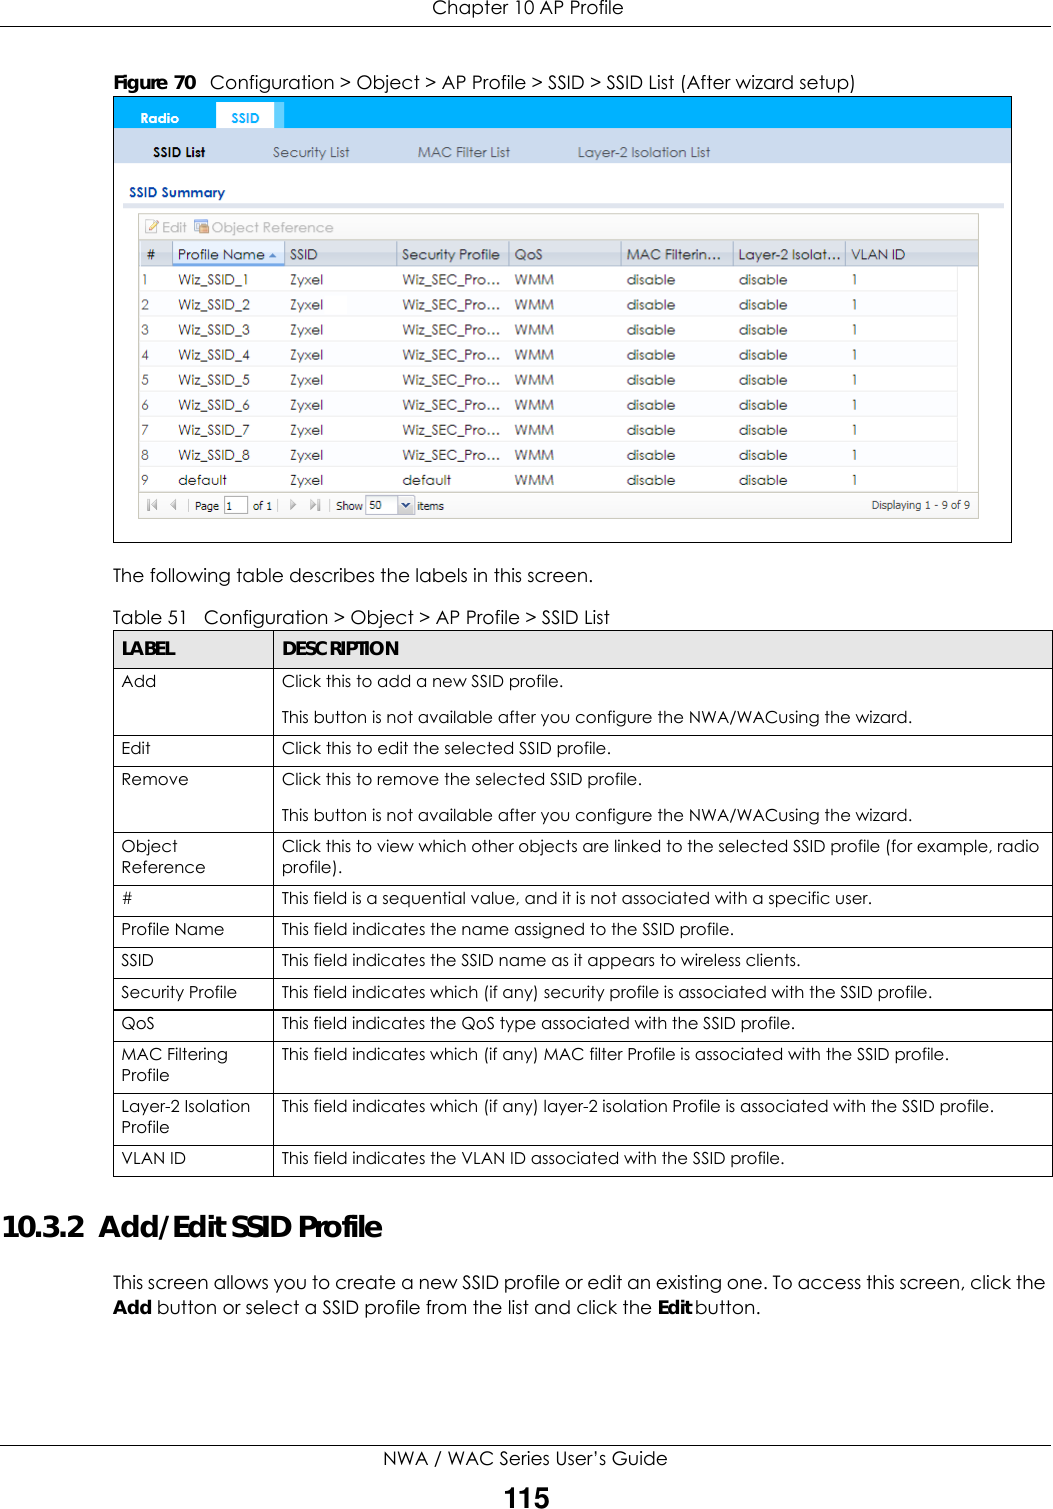  Chapter 10 AP ProfileNWA / WAC Series User’s Guide115Figure 70   Configuration &gt; Object &gt; AP Profile &gt; SSID &gt; SSID List (After wizard setup) The following table describes the labels in this screen.  10.3.2  Add/Edit SSID ProfileThis screen allows you to create a new SSID profile or edit an existing one. To access this screen, click the Add button or select a SSID profile from the list and click the Edit button.Table 51   Configuration &gt; Object &gt; AP Profile &gt; SSID ListLABEL DESCRIPTIONAdd Click this to add a new SSID profile. This button is not available after you configure the NWA/WACusing the wizard.Edit Click this to edit the selected SSID profile.Remove Click this to remove the selected SSID profile.This button is not available after you configure the NWA/WACusing the wizard.Object ReferenceClick this to view which other objects are linked to the selected SSID profile (for example, radio profile).# This field is a sequential value, and it is not associated with a specific user.Profile Name This field indicates the name assigned to the SSID profile.SSID This field indicates the SSID name as it appears to wireless clients.Security Profile This field indicates which (if any) security profile is associated with the SSID profile.QoS This field indicates the QoS type associated with the SSID profile.MAC Filtering ProfileThis field indicates which (if any) MAC filter Profile is associated with the SSID profile.Layer-2 Isolation ProfileThis field indicates which (if any) layer-2 isolation Profile is associated with the SSID profile.VLAN ID This field indicates the VLAN ID associated with the SSID profile.